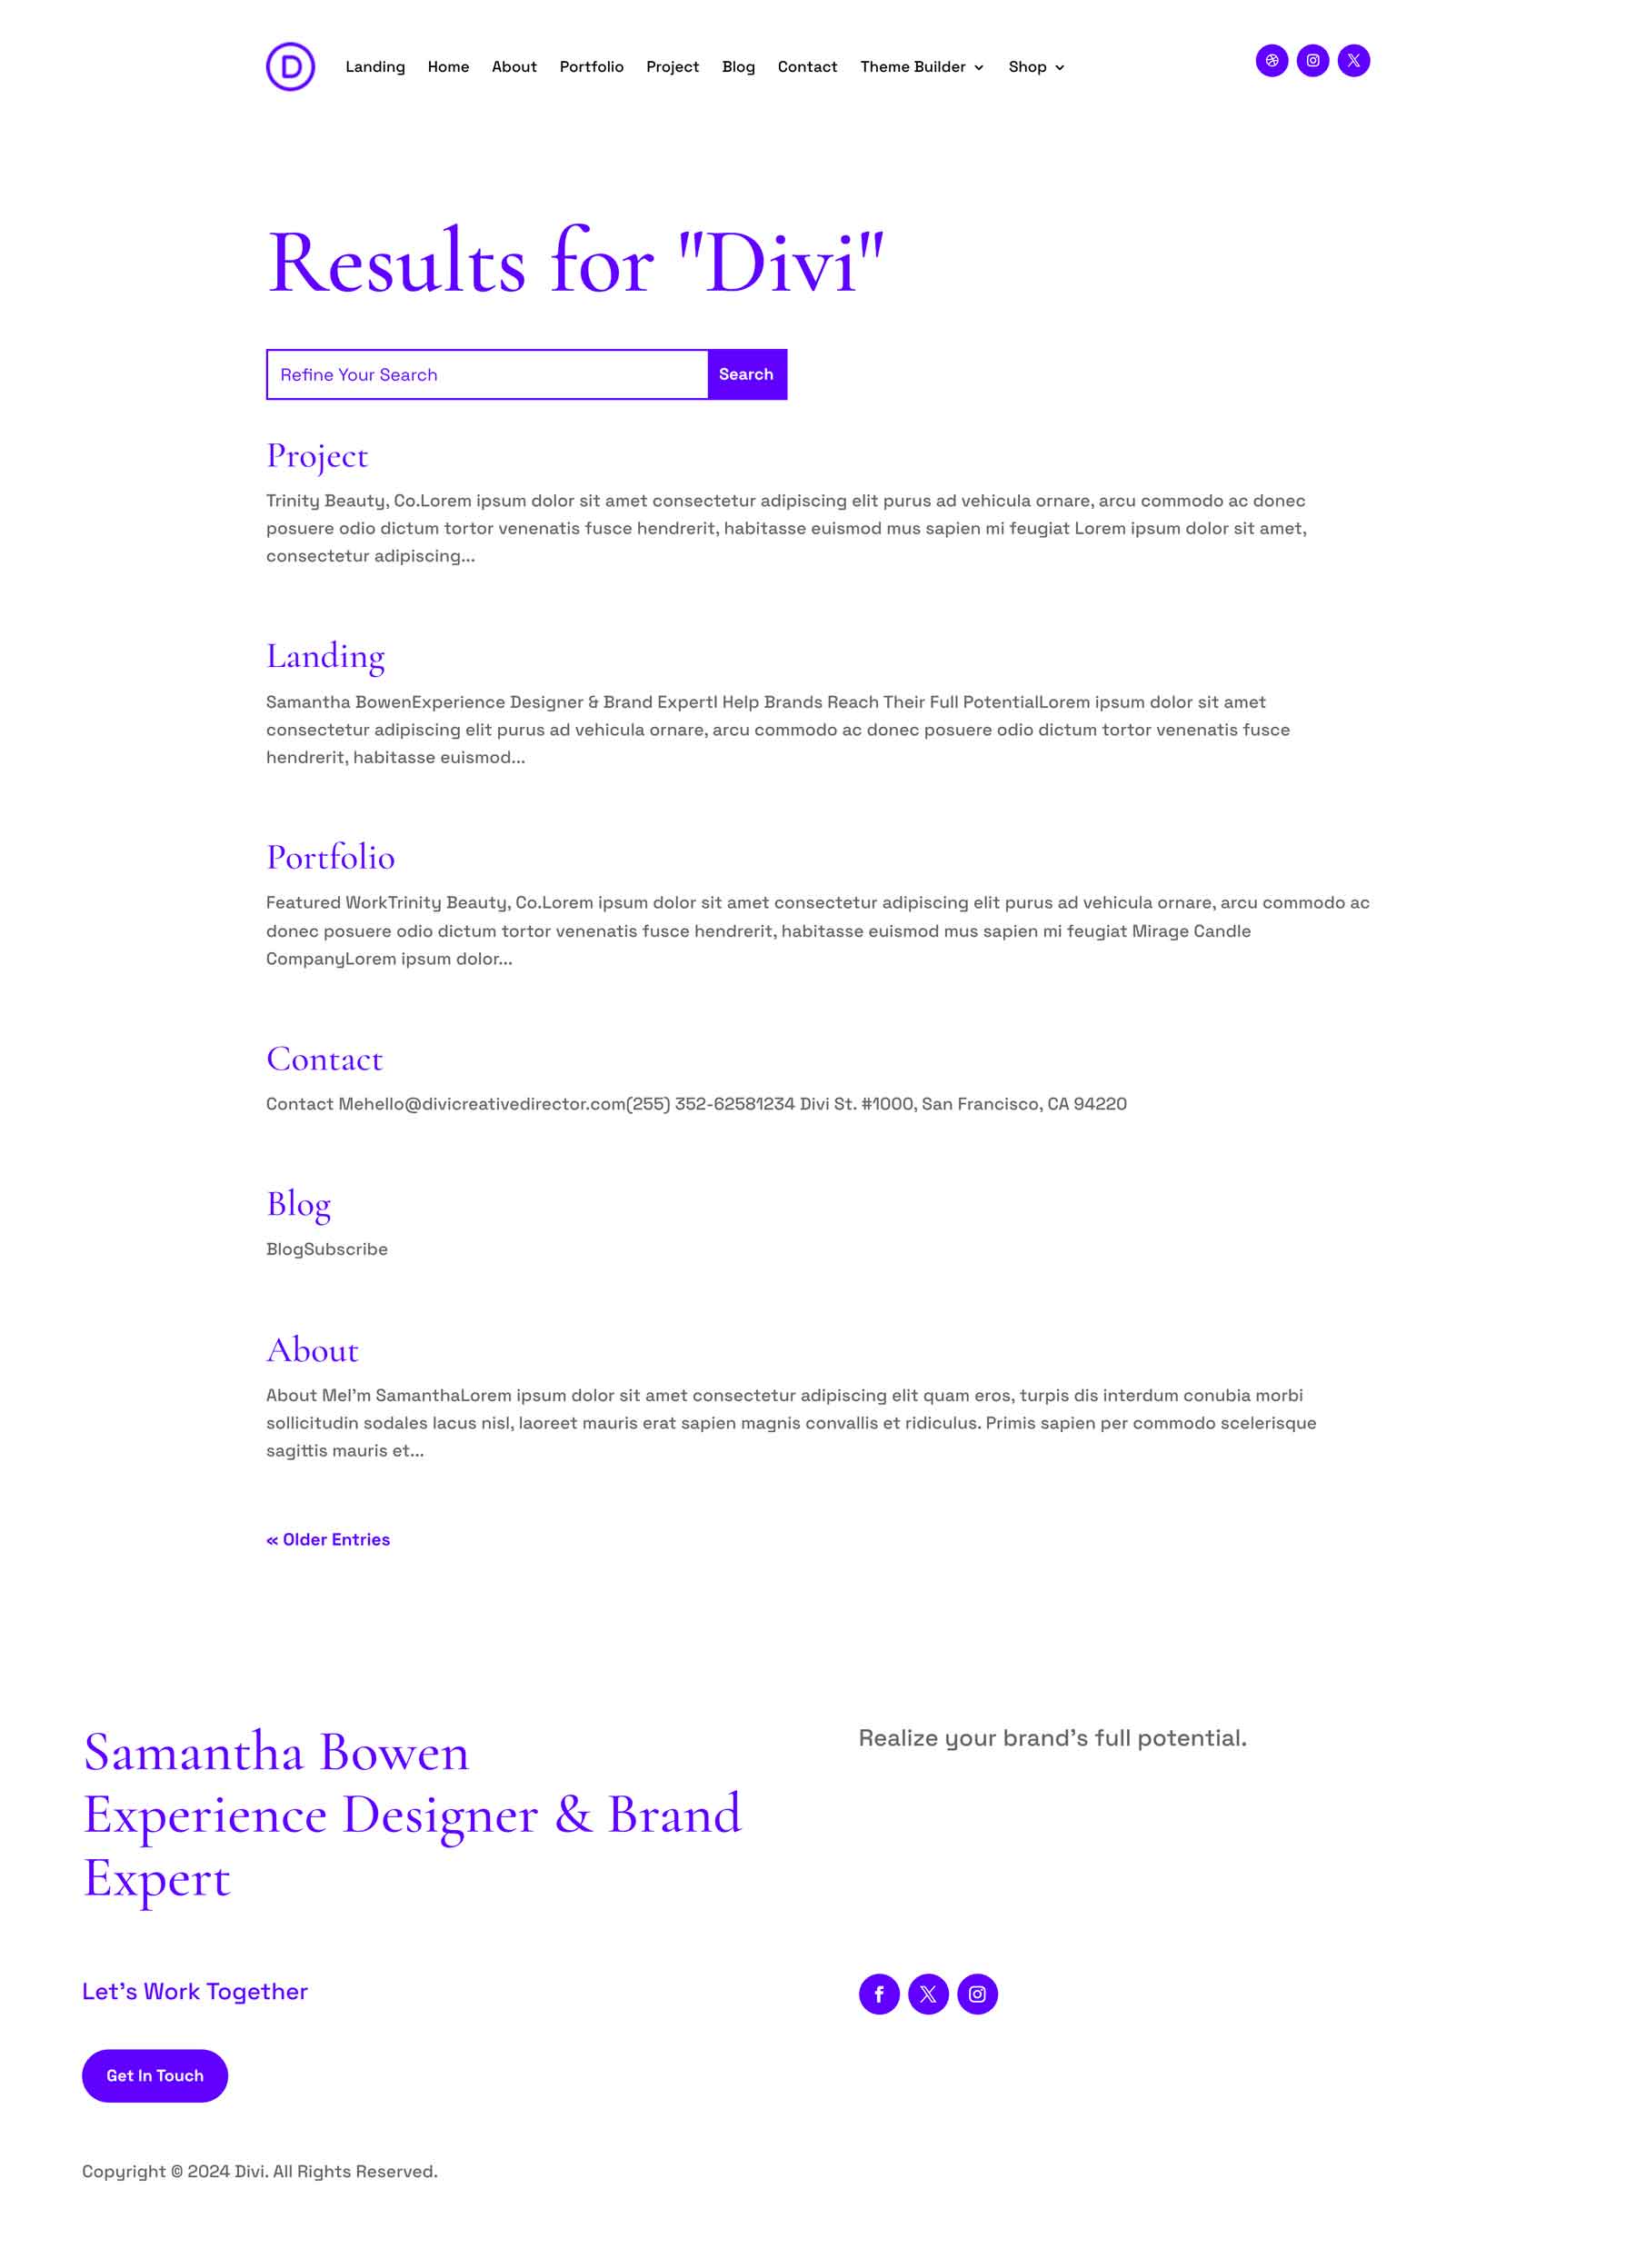 Creative Director theme builder pack